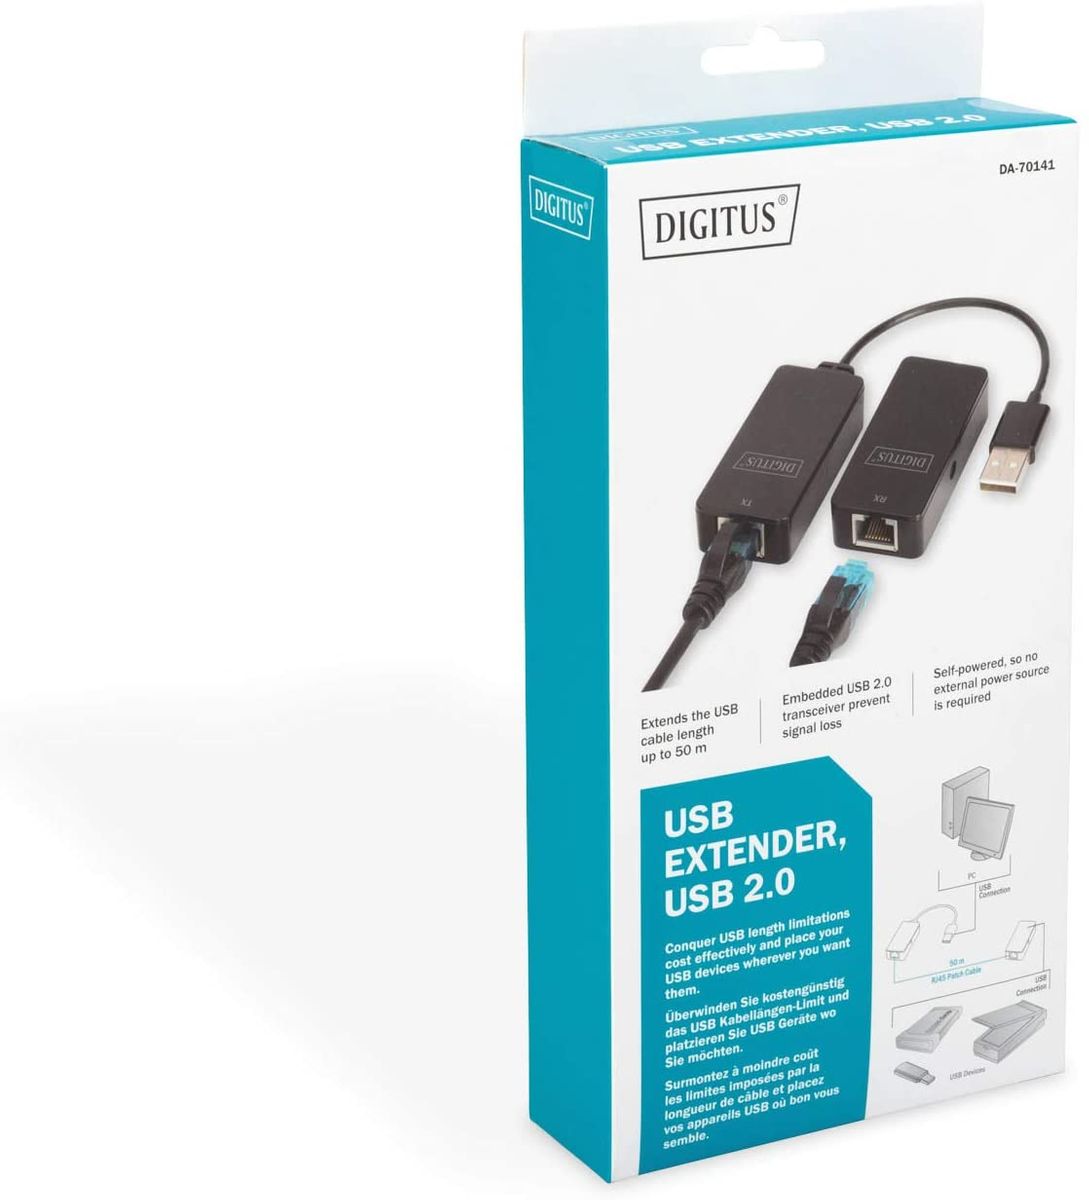 Digitus USB Extender, USB 2.0, 50 m for use with Cat5/5e/6 (UTP, STP or SFT) cable